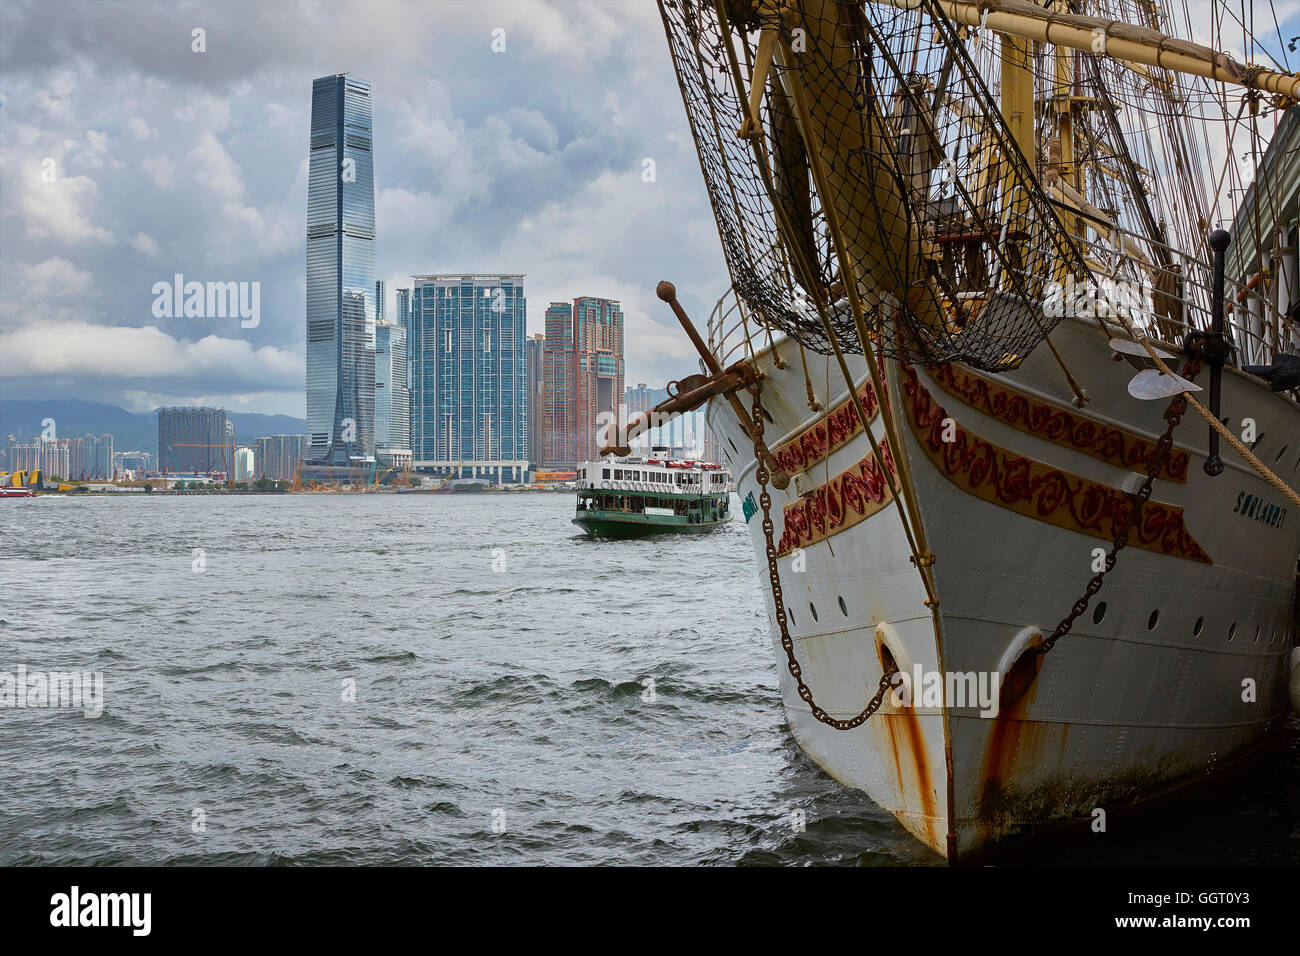 The Norwegian Tall Ship, Sørlandet, Moored At The Central Ferry Pier, The Kowloon Skyline In Background, Hong Kong. Stock Photo